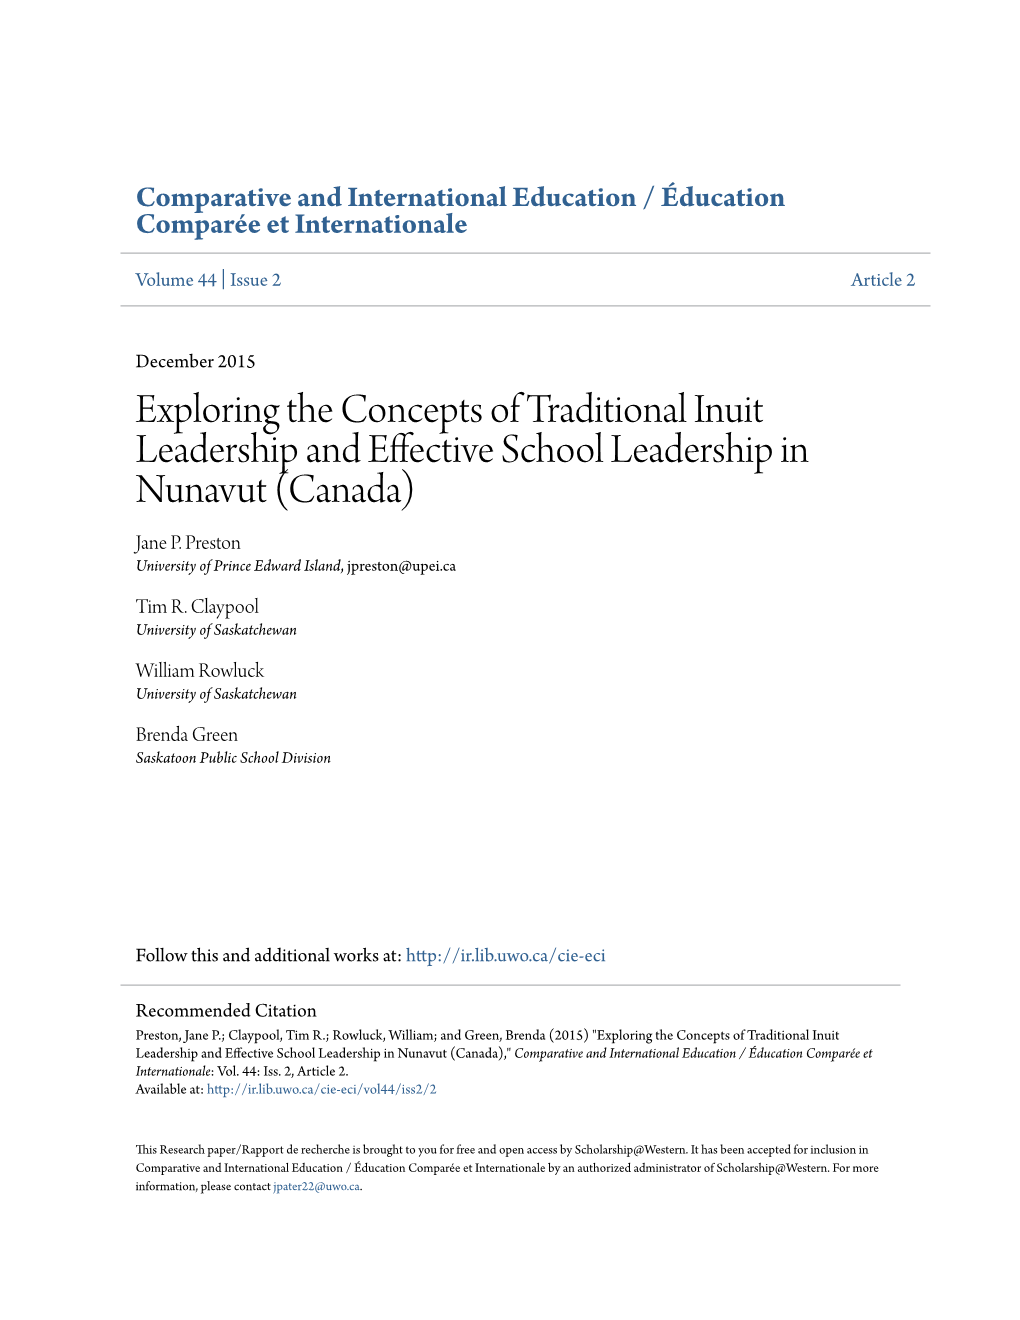 Exploring the Concepts of Traditional Inuit Leadership and Effective School Leadership in Nunavut (Canada) Jane P